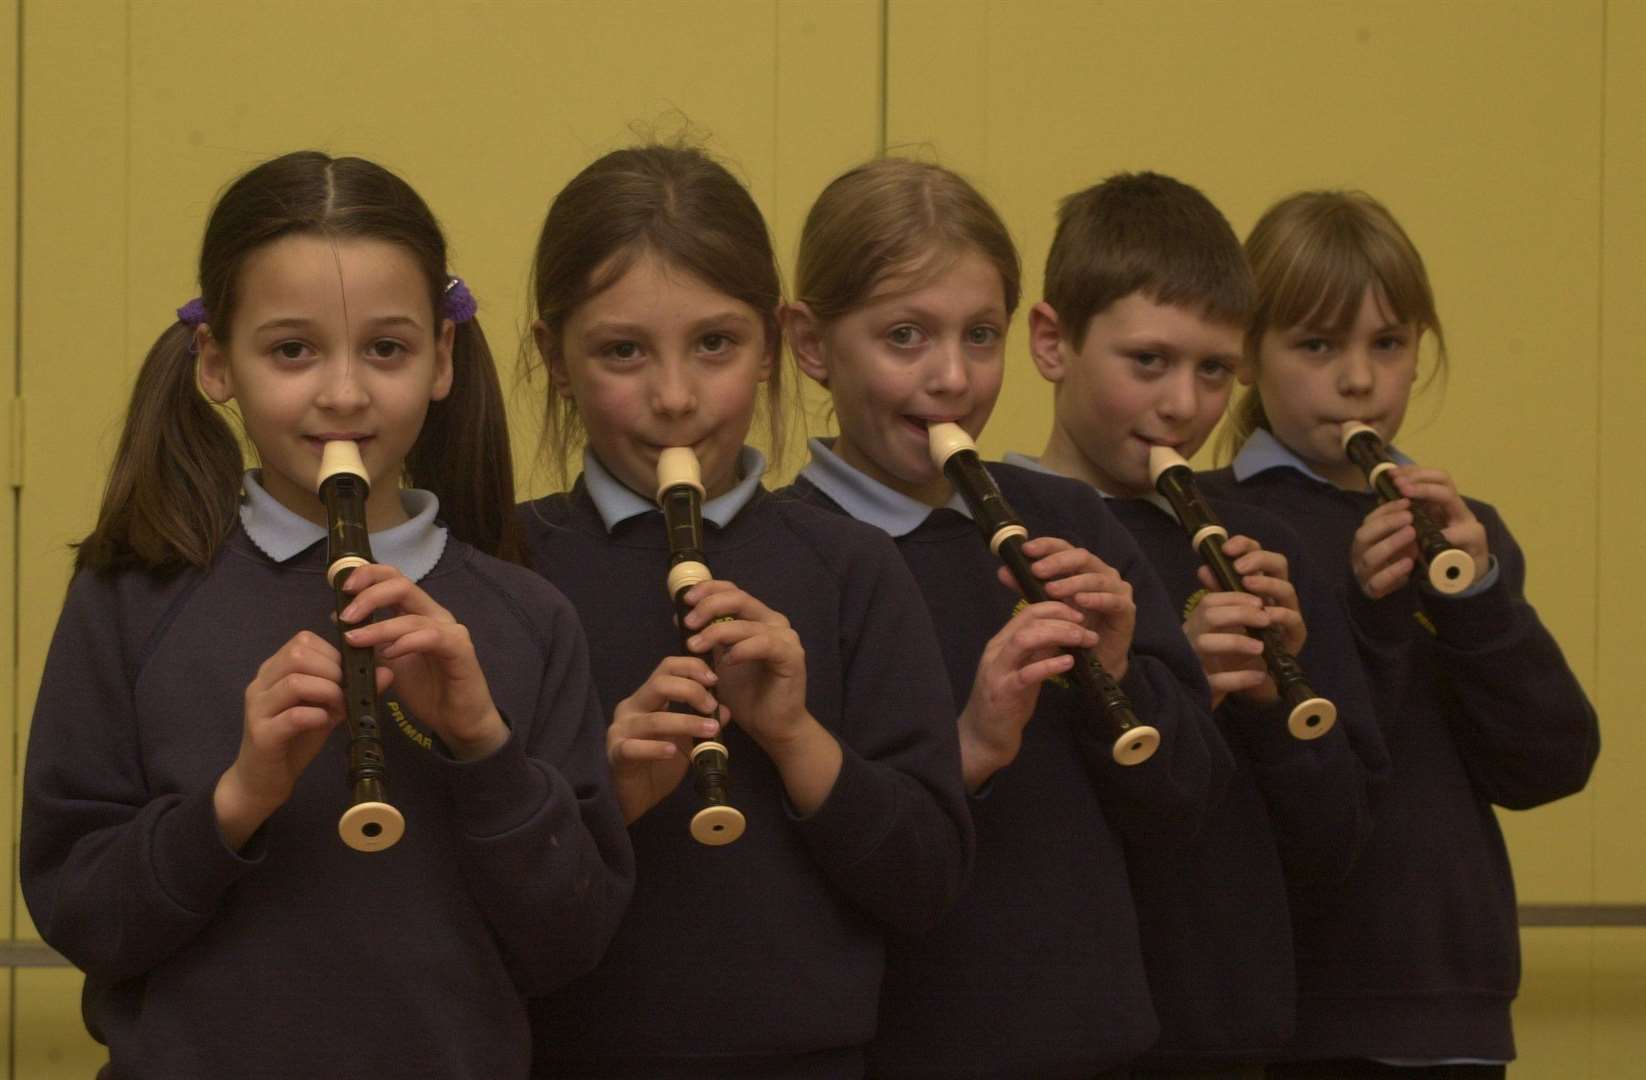 Did your school offer recorder lessons or take you to recorder festivals?